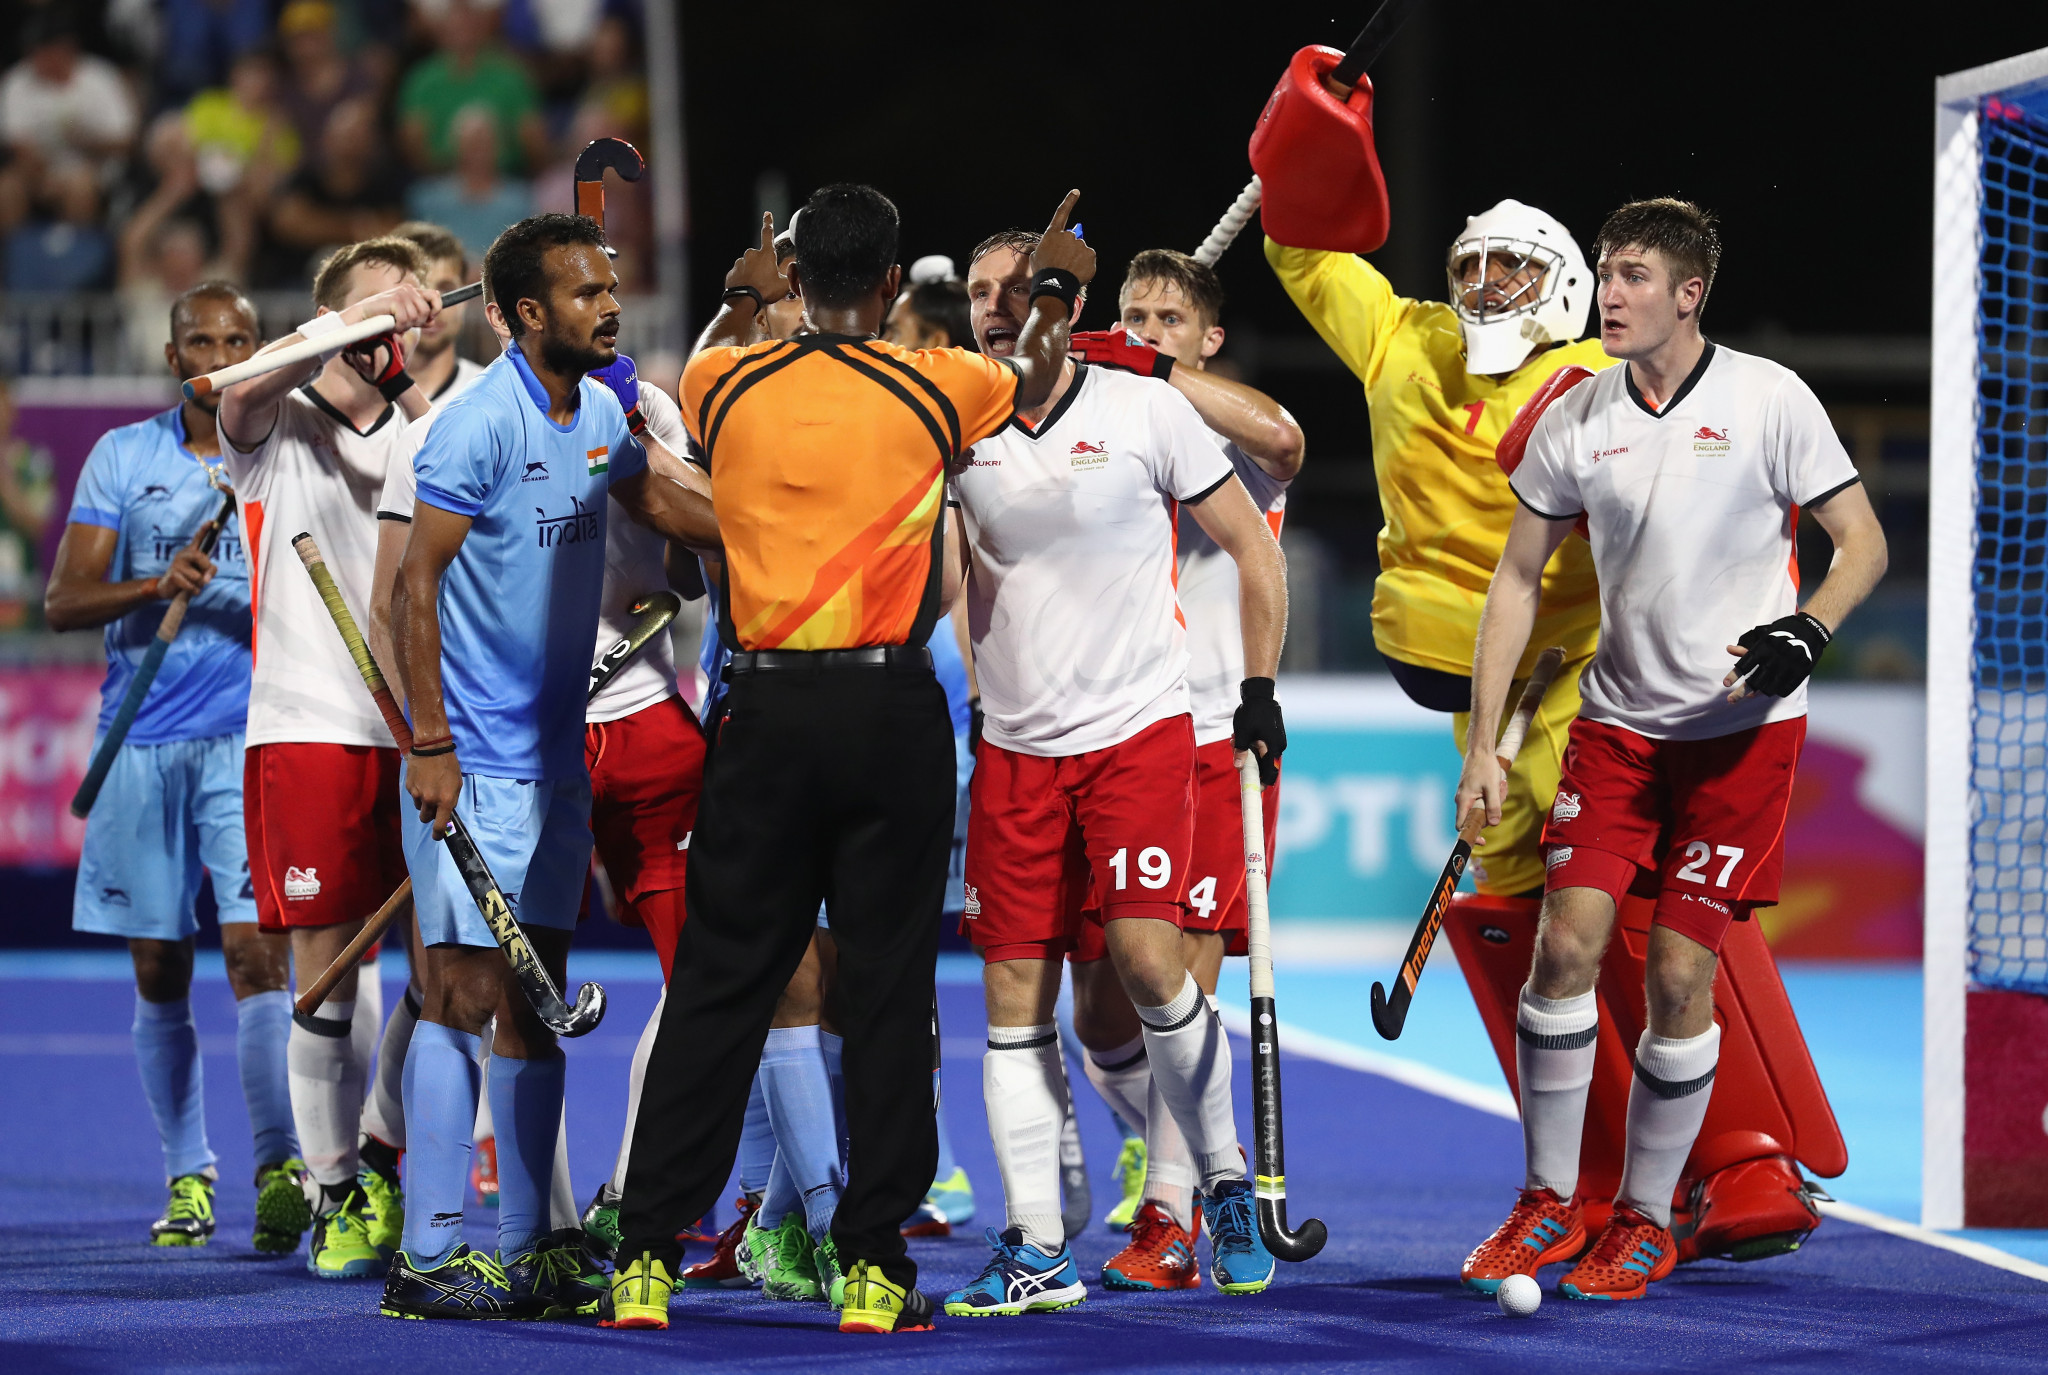 It is hoped the programme will help improve the standard of refereeing at major hockey events ©Getty Images